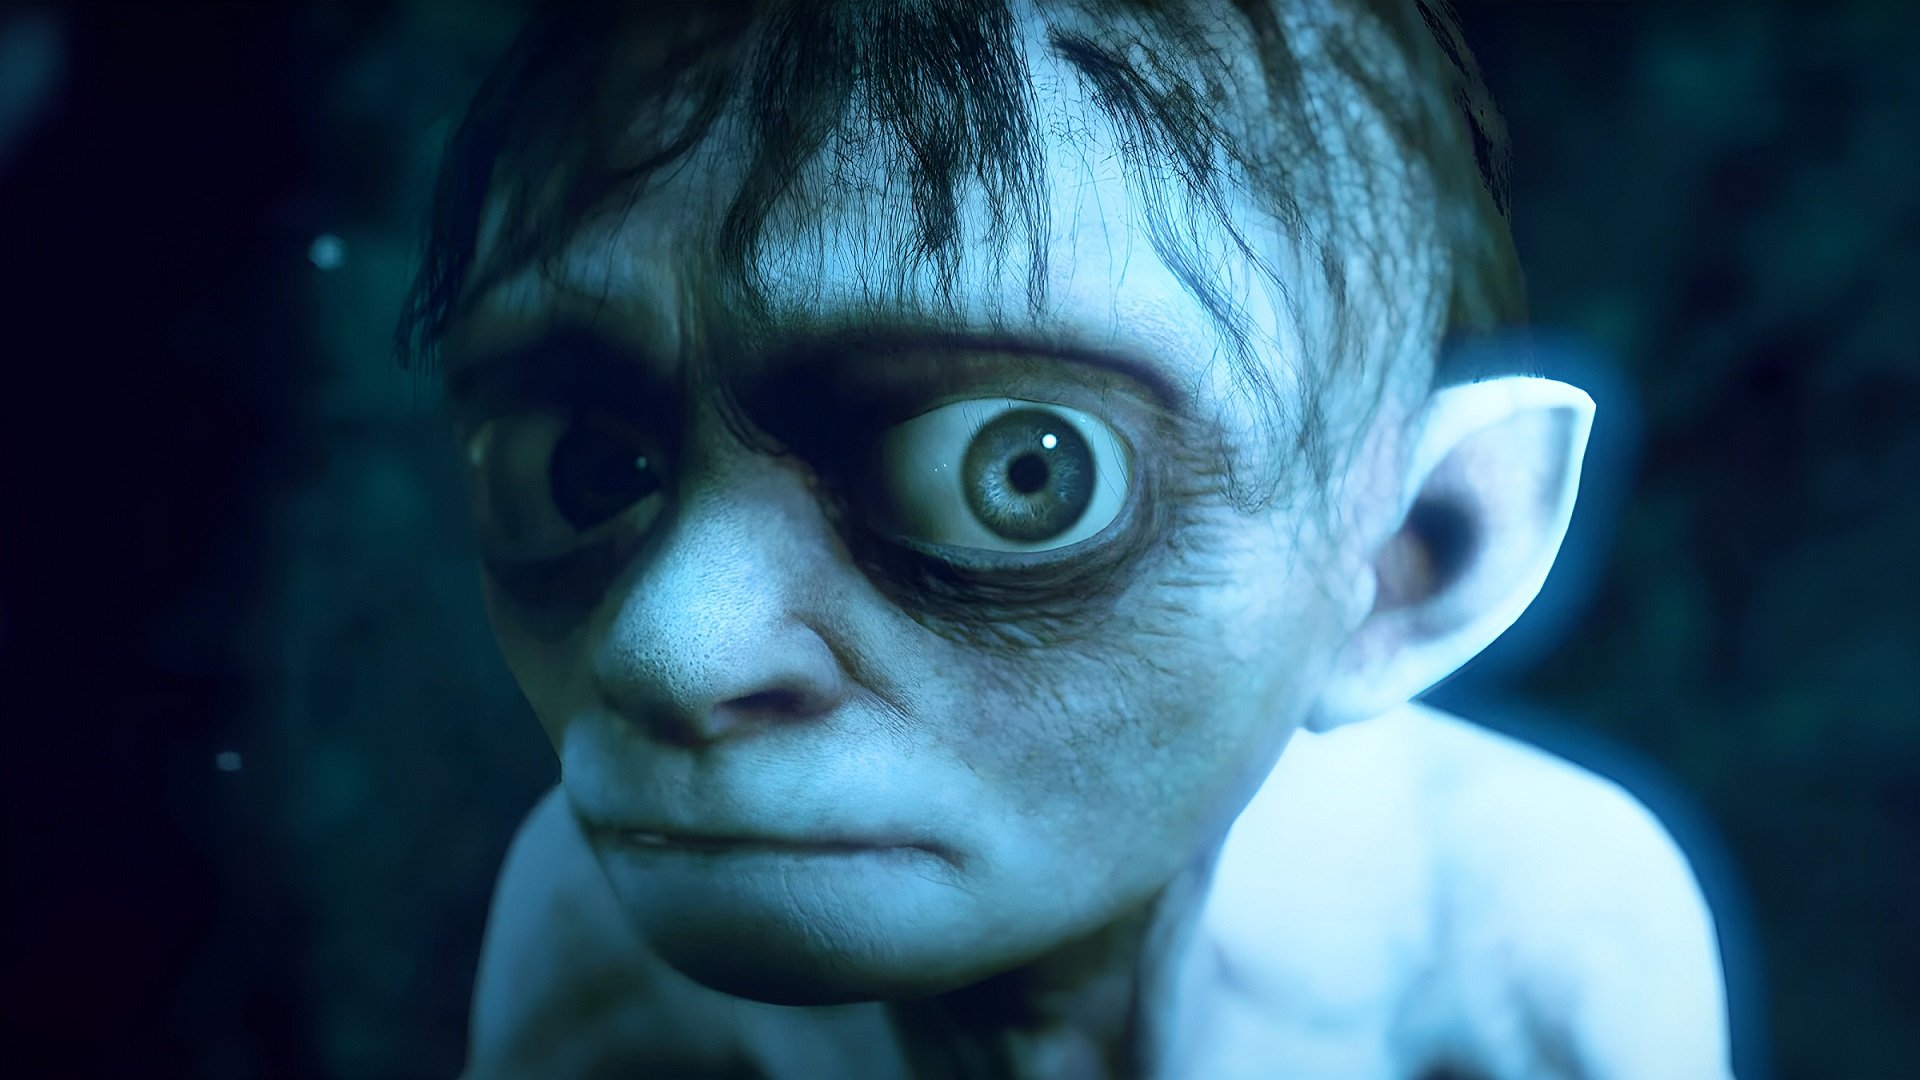 The Lord of the Rings: Gollum - Official The Making of Gollum